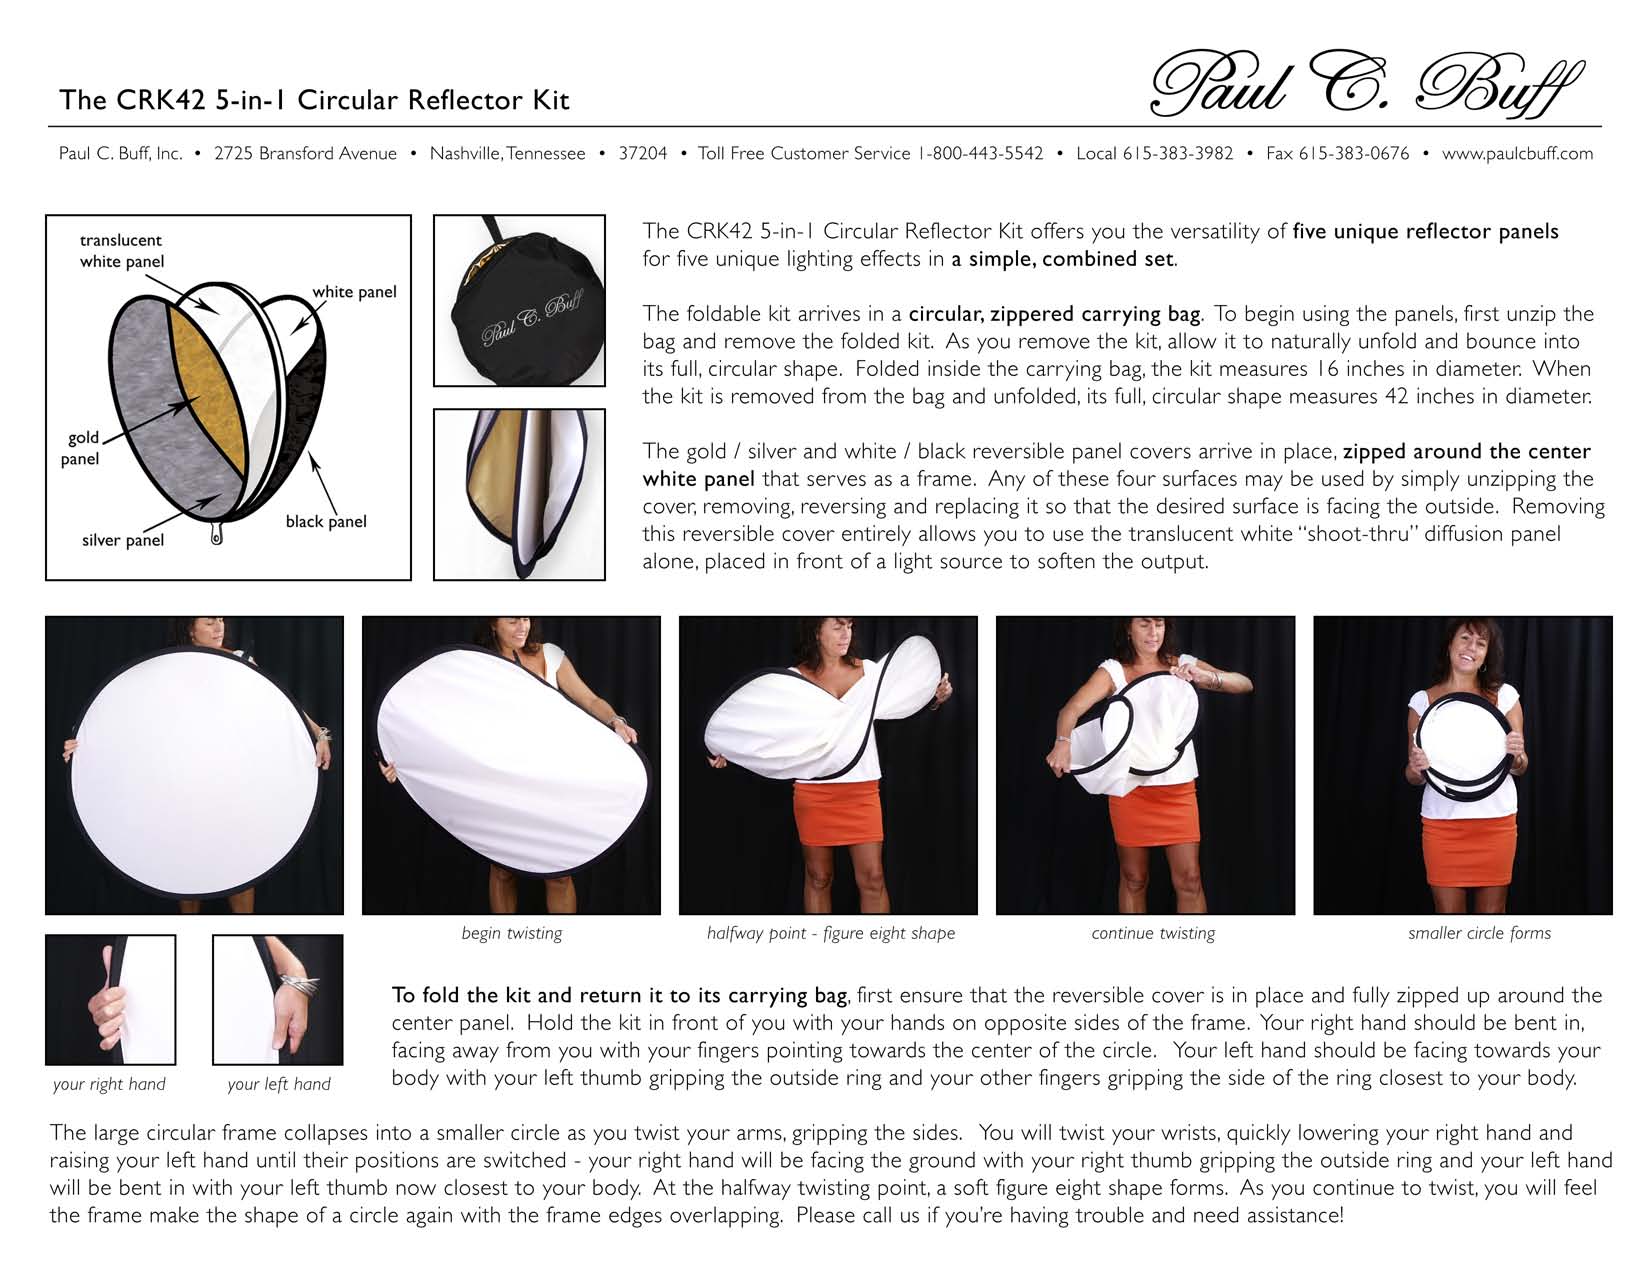 5-in-1 Reflector Kit Instructions